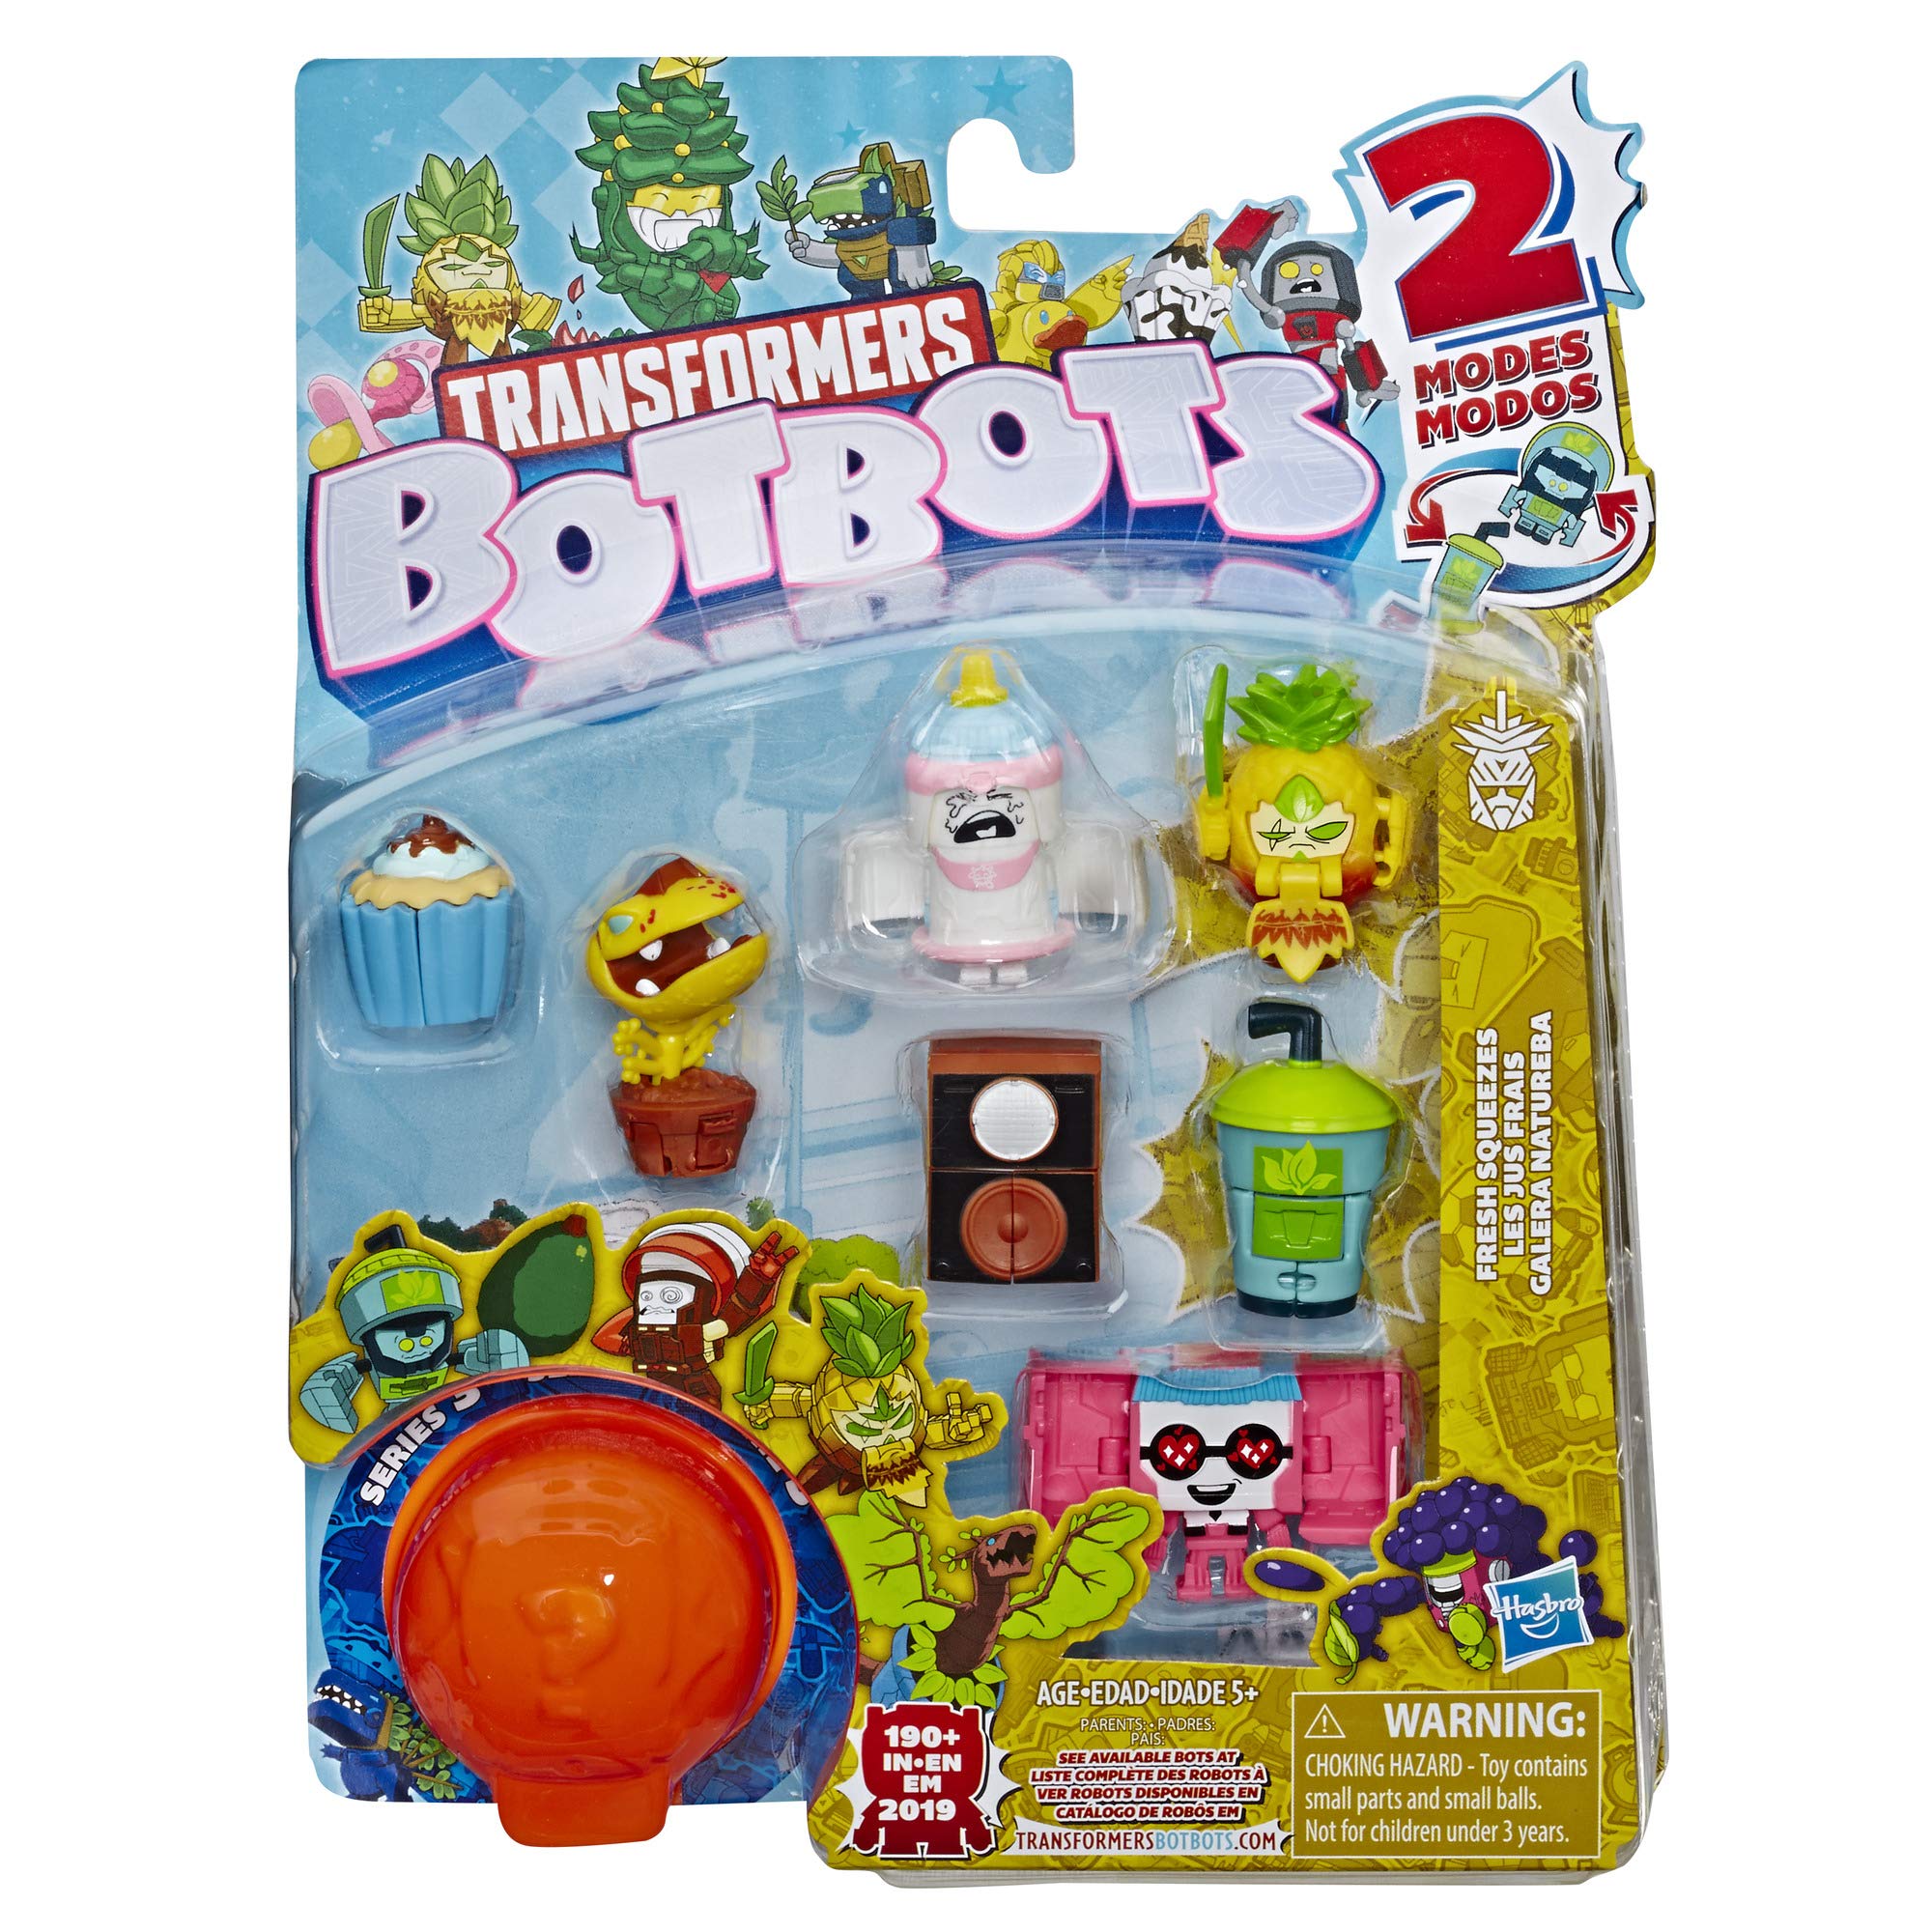 Transformers Toys Botbots Series 3 Fresh Squeezes 8 Pack - Mystery 2-in-1 Collectible Figures! Kids Ages 5 & Up (Styles & Colors May Vary) by Hasbro